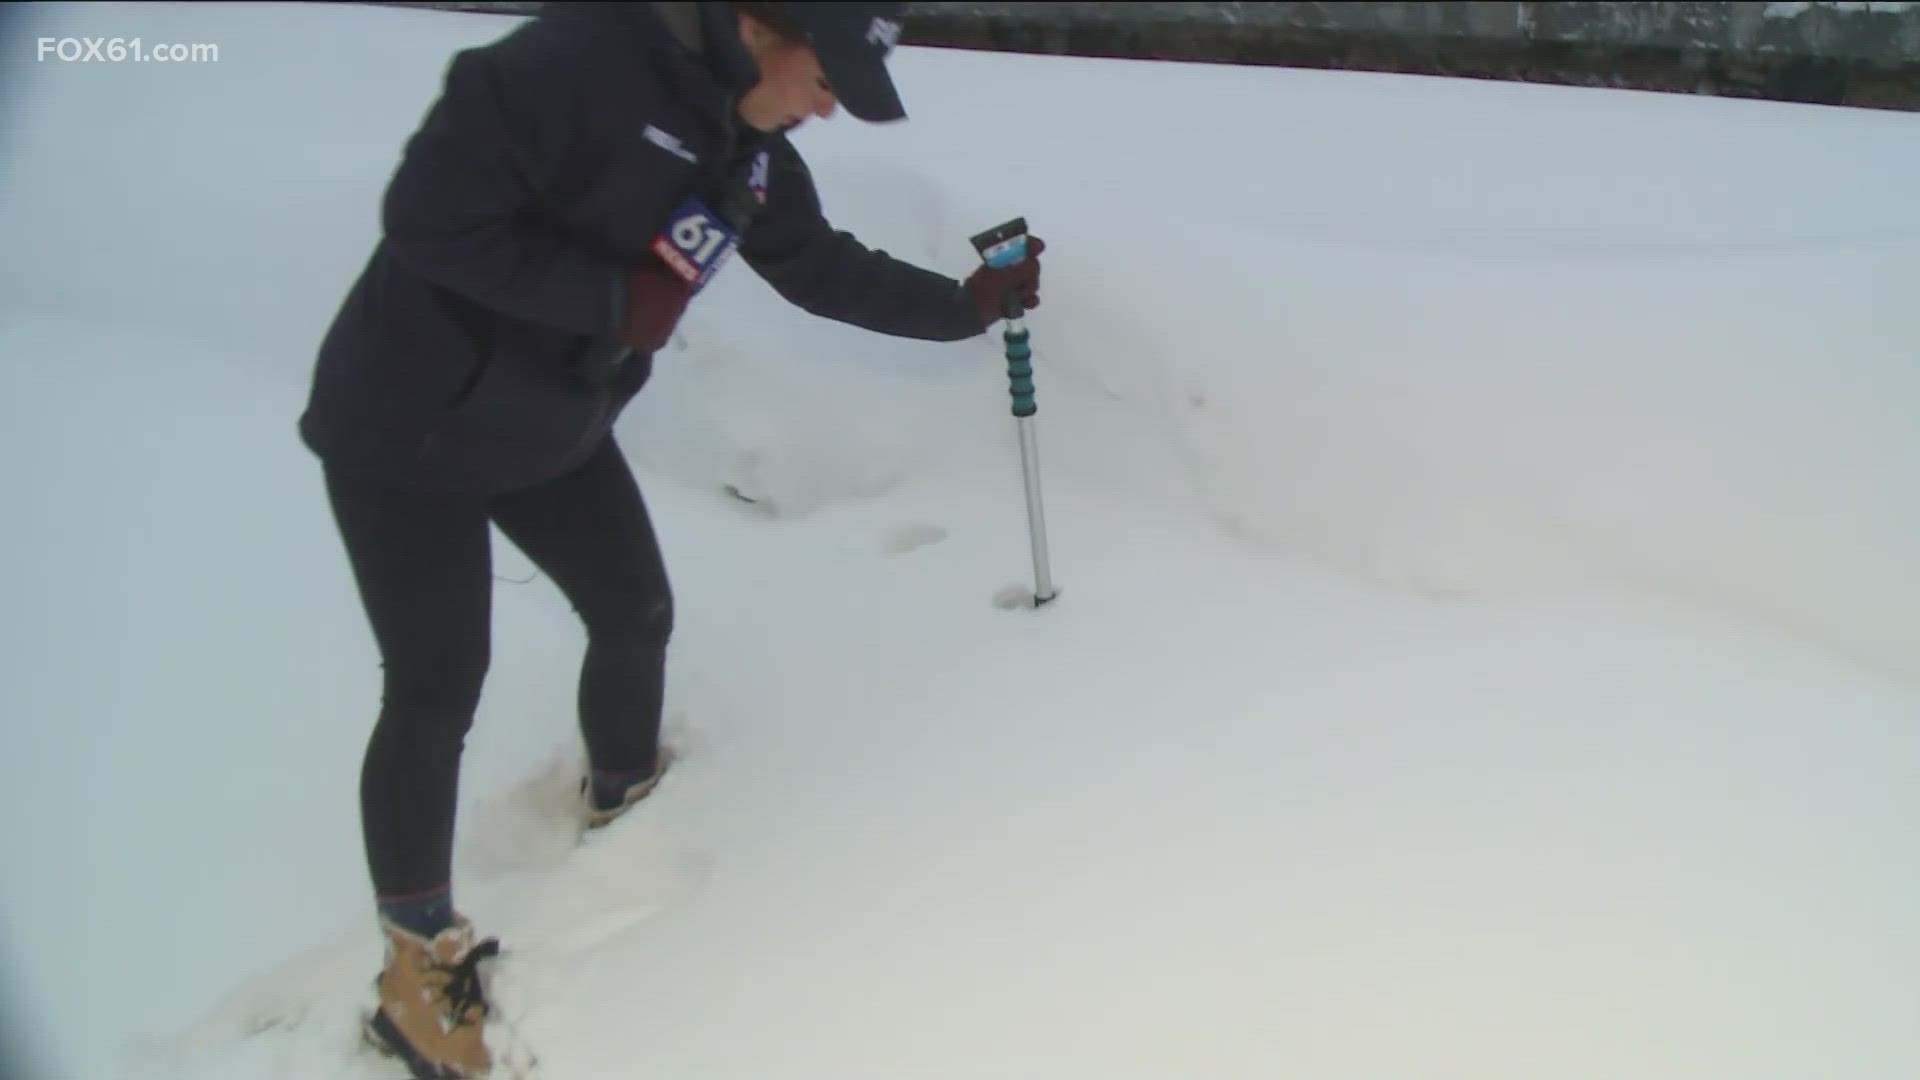 FOX61's Brooke Griffin is in Norfolk, where residents are digging out of the snow the nor'easter left behind. Neighbors say they're used to the snow.